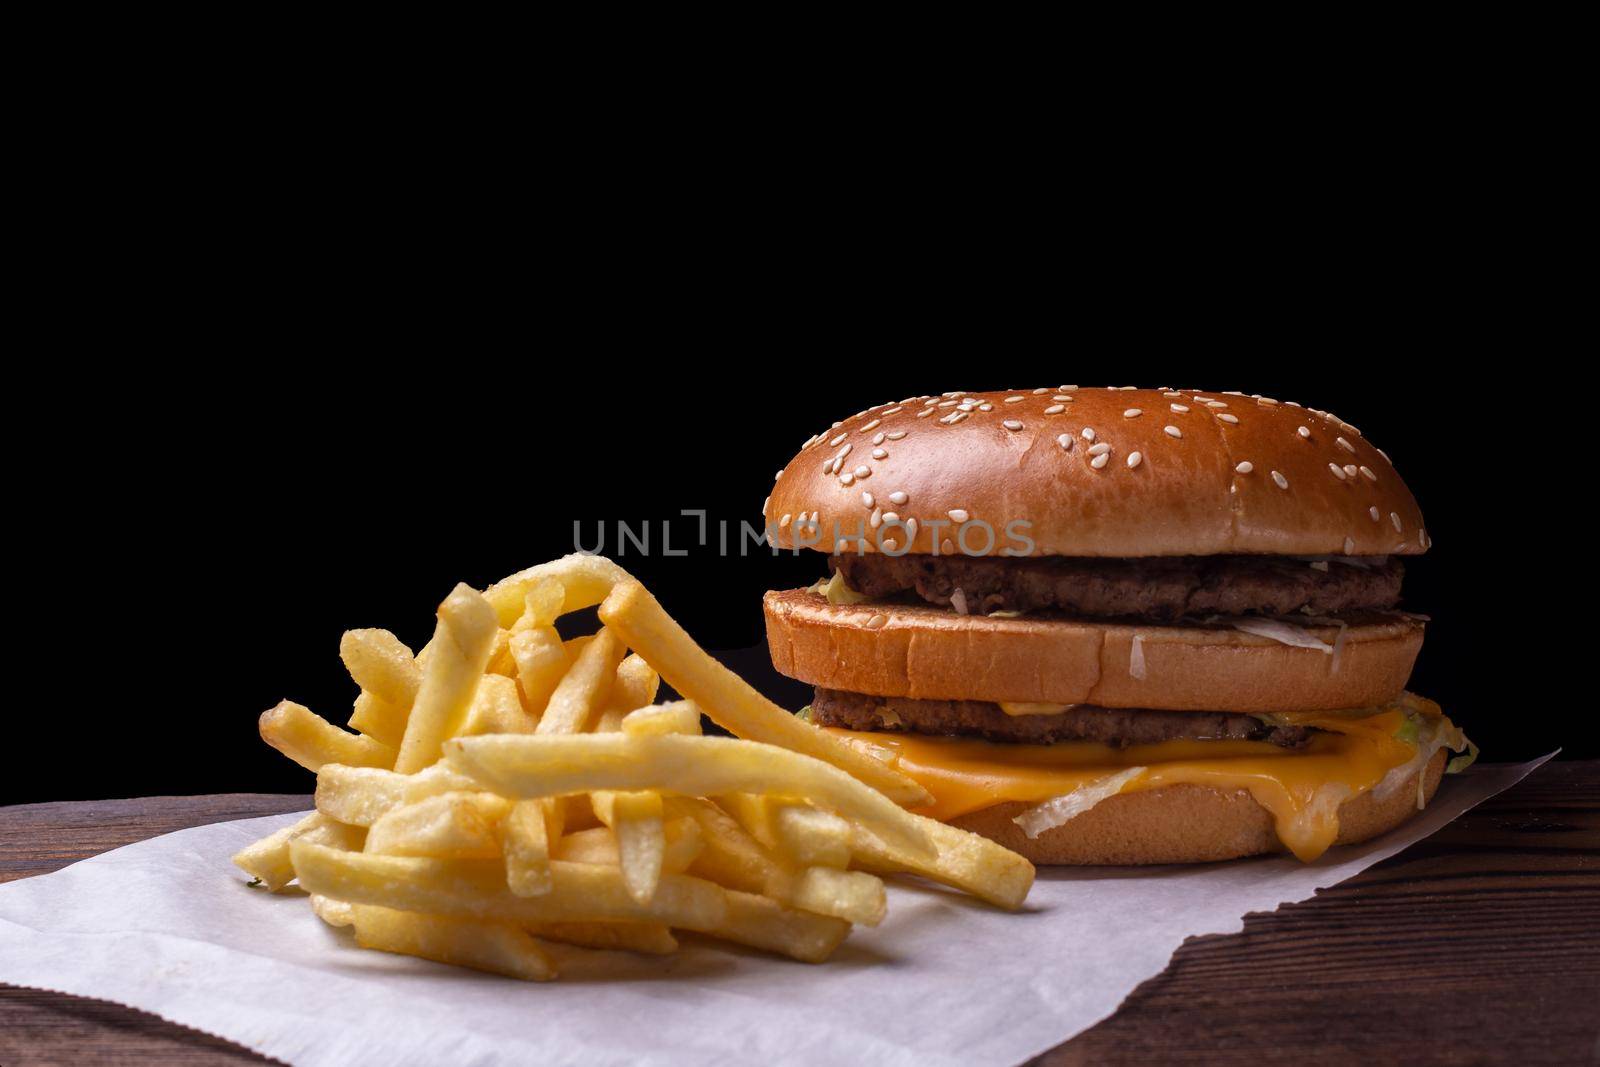 Hamburger, details of two gourmet double burgers, cheese, tomato, bacon, lettuce, onion. on wooden surface, abstract background selective focus